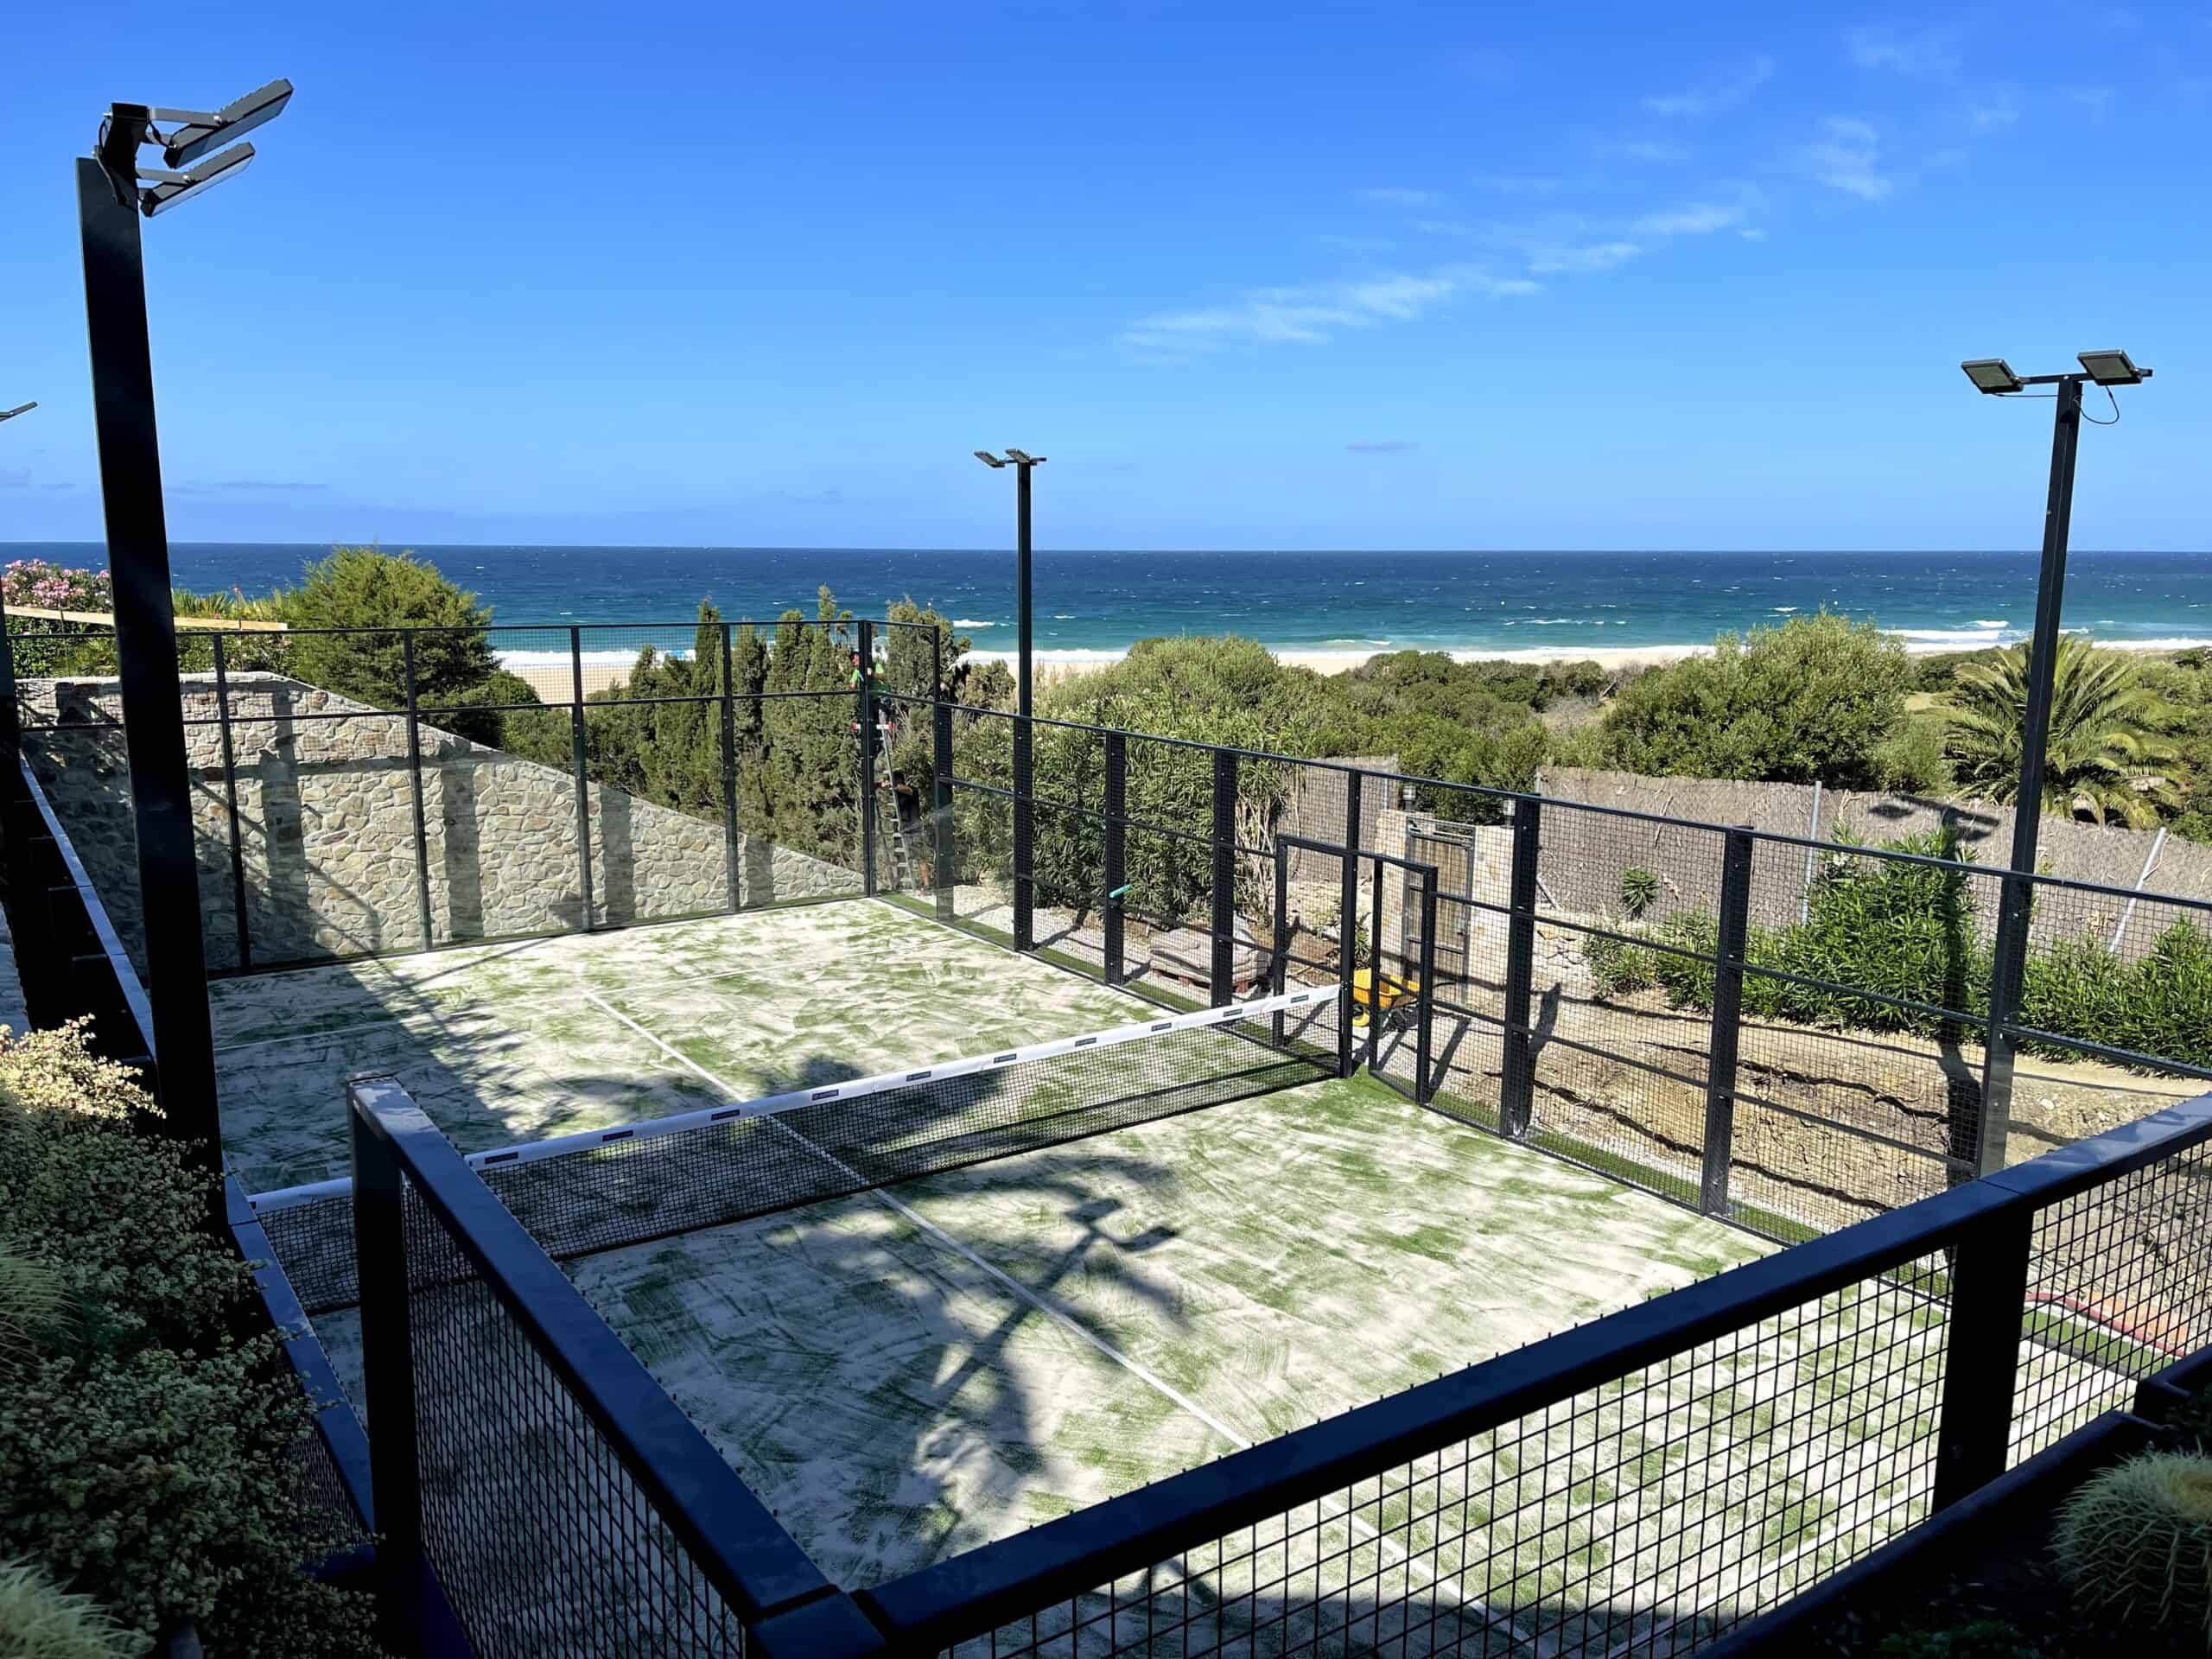 Padelcreations - We deliver and install Padel Courts Padel Courts for extreme situations ...  Padel Court Construction Initial information %Post Title